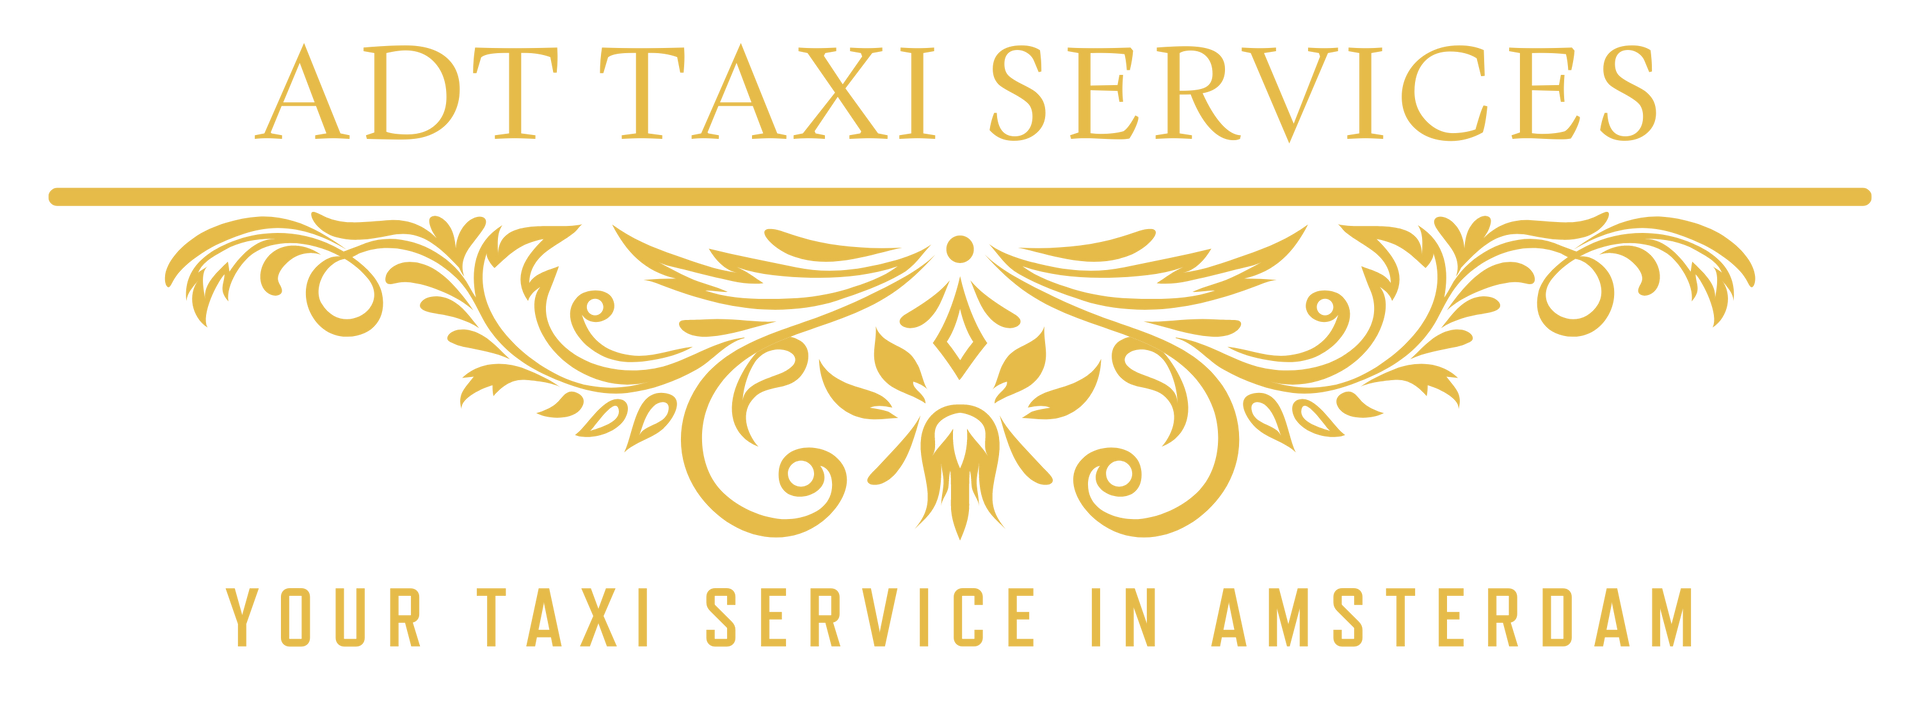 ADT Taxi Amsterdam - Taxi Services in Amsterdam